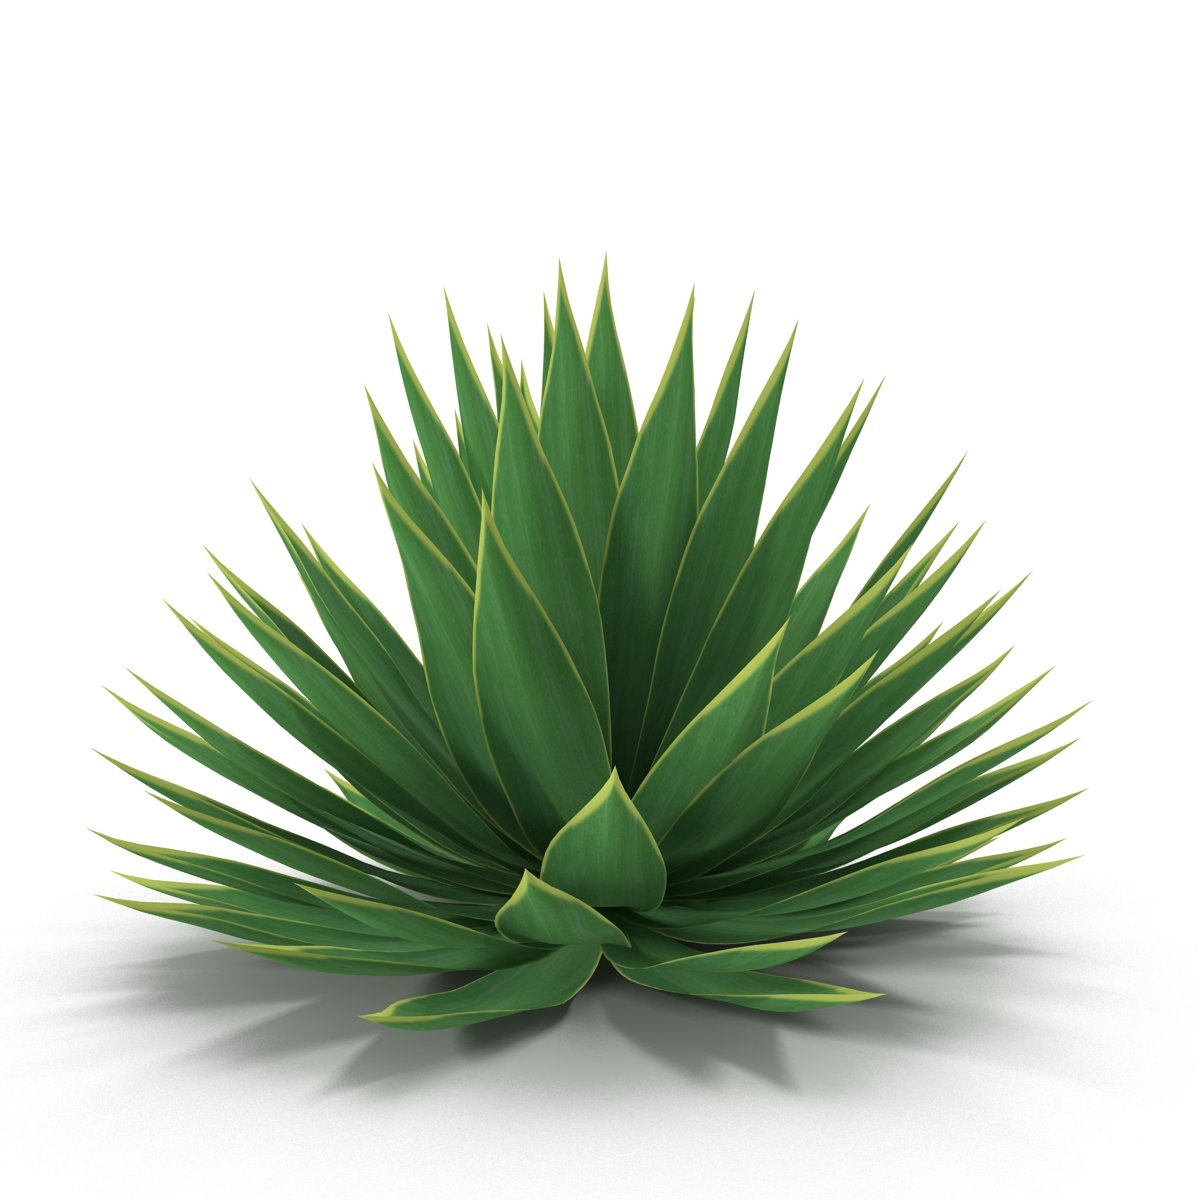 Green plant with long leaves on a white background.